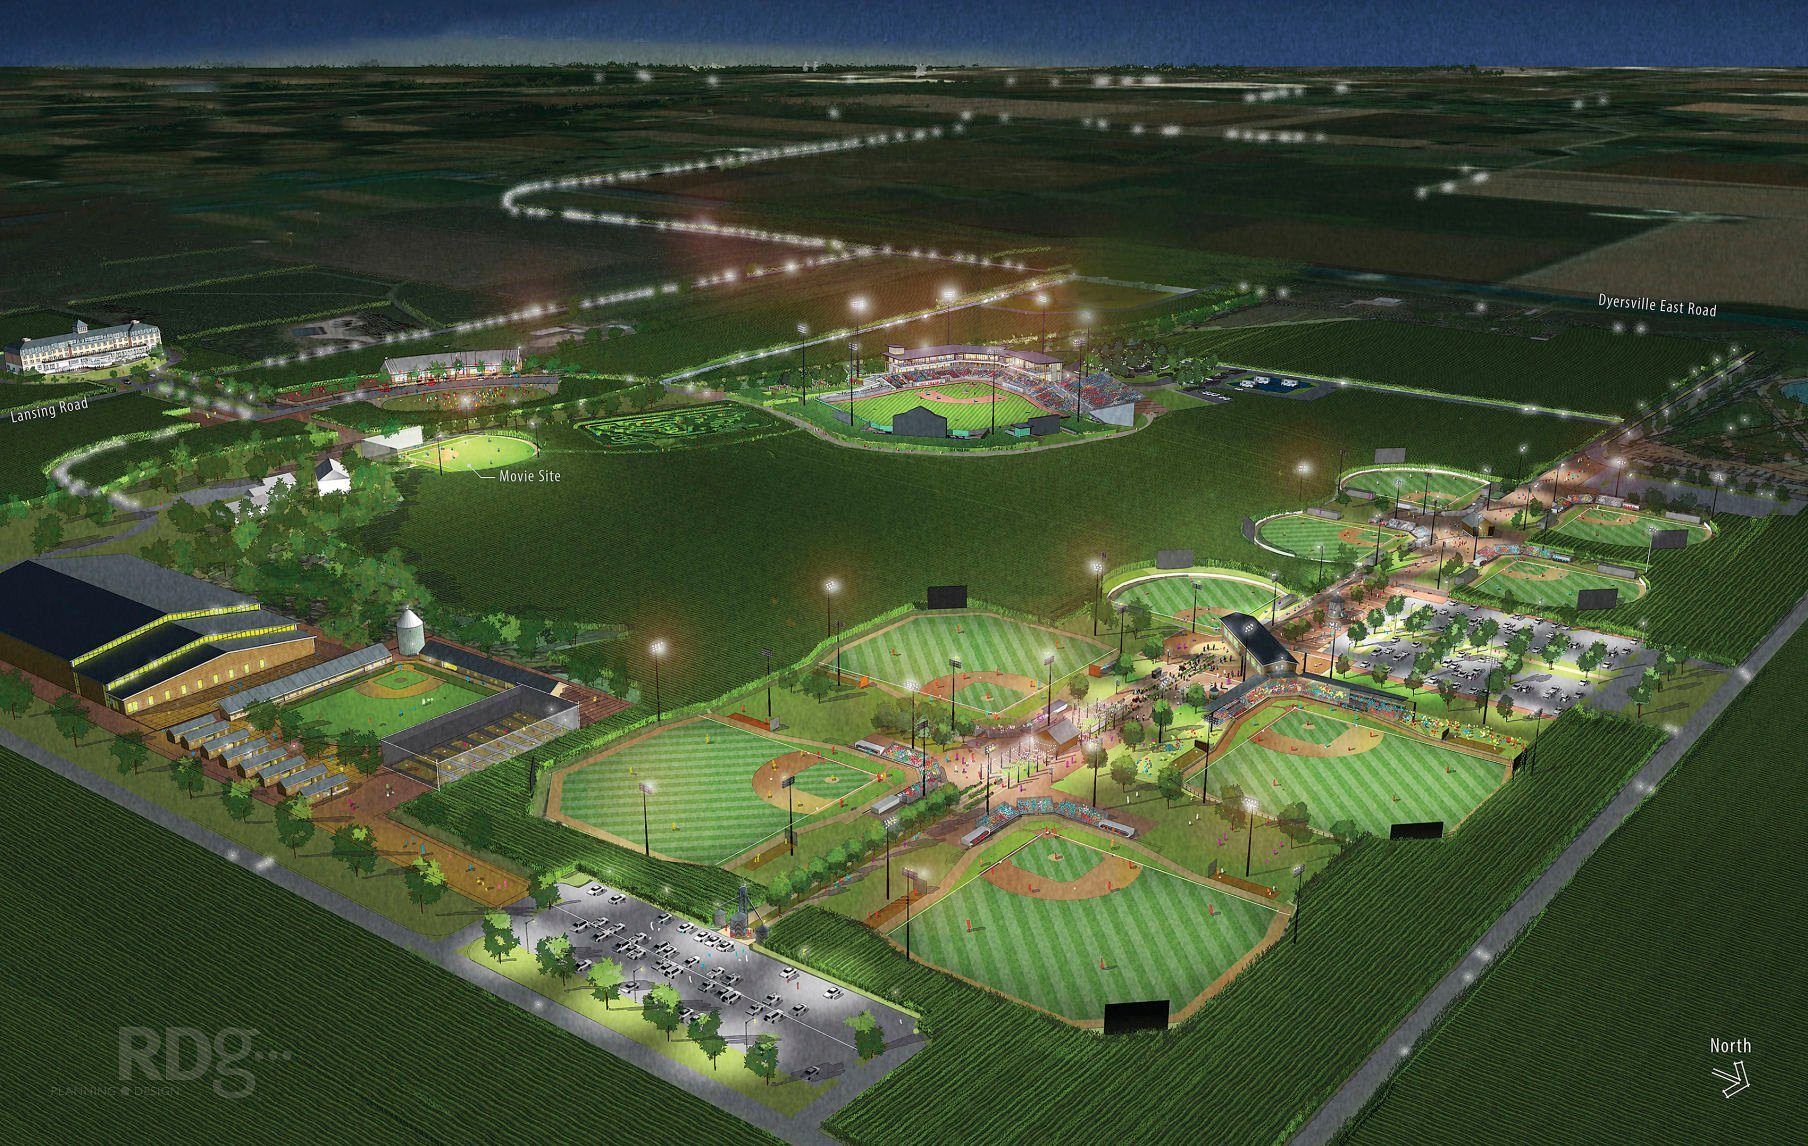 The expansion at the Field of Dreams includes a hotel, fieldhouse, amphitheater, RV park, ballfields and team dorms.    PHOTO CREDIT: Courtesy of RDG Planning & Design